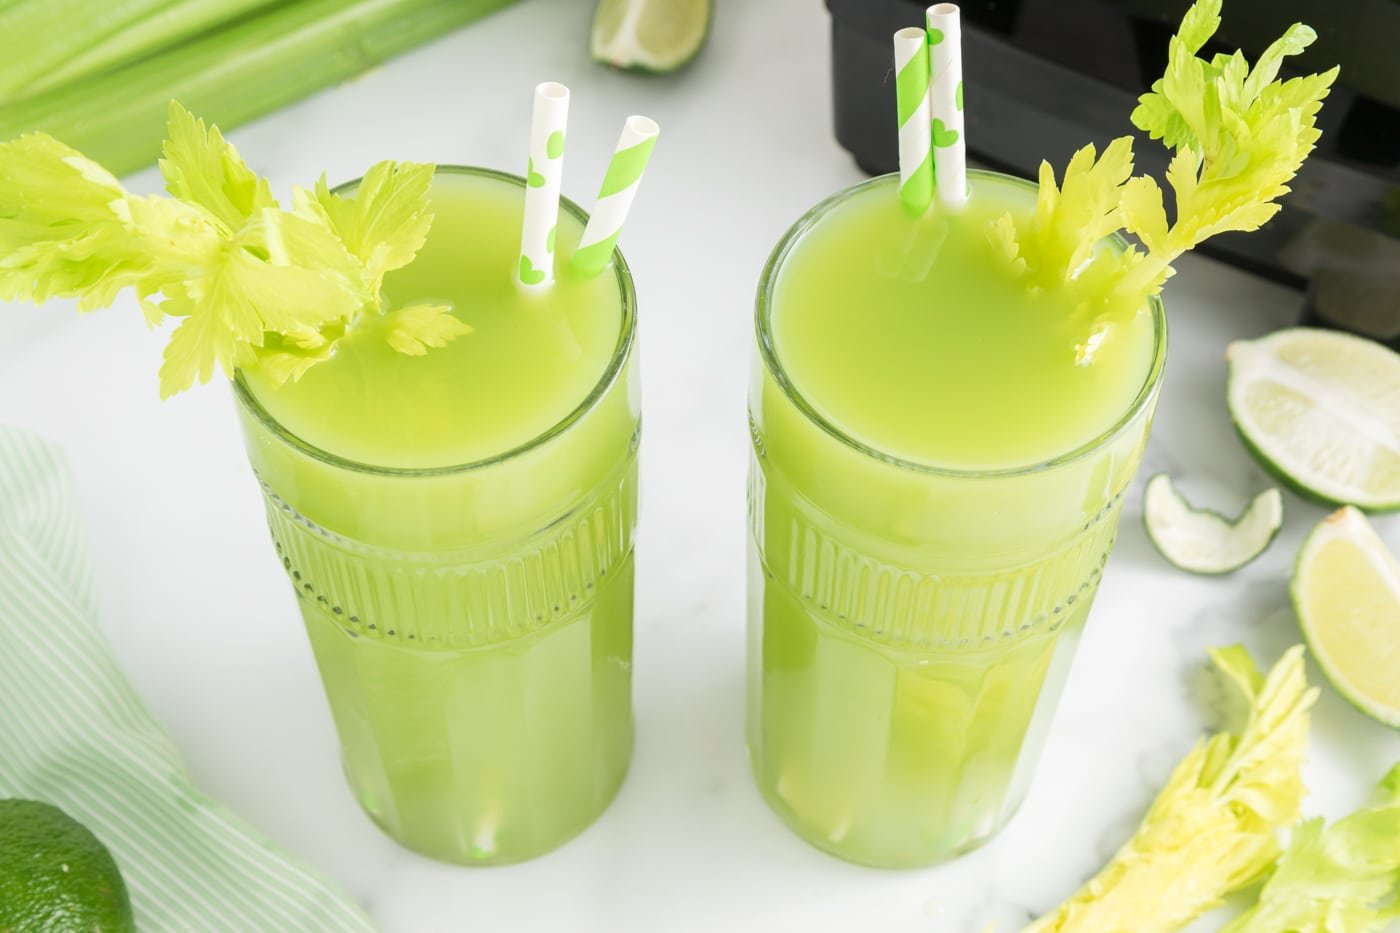 https://www.cleaneatingkitchen.com/wp-content/uploads/2020/07/two-glasses-of-celery-juice.jpg